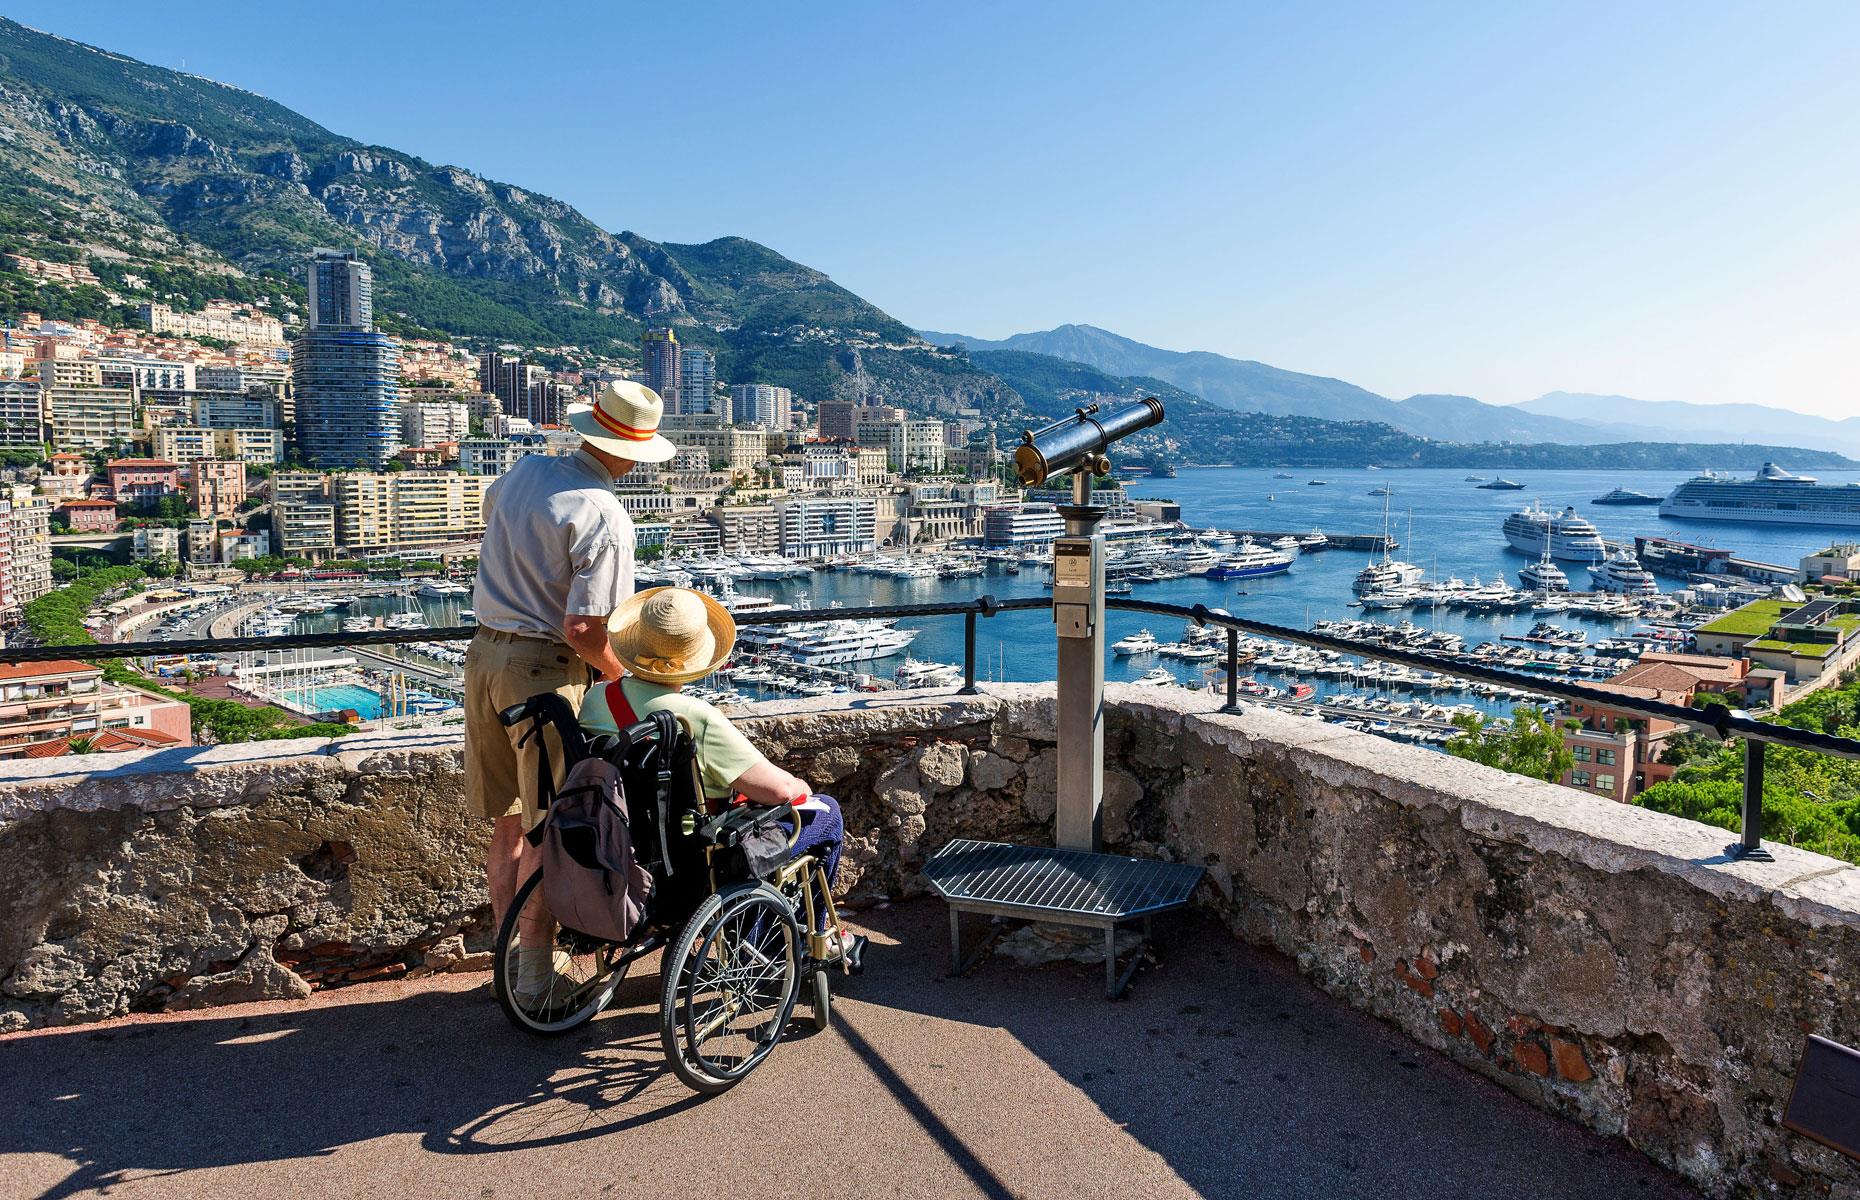 <p>The super-rich principality of Monaco has the highest life expectancy in the world right now at just over 87 years. It stood at 66.5 in 1950 and is projected to rise to the ripe old age of 90.2 in 2050.</p>  <p>Needless to say, the abundant wealth of the tiny country's inhabitants is a fundamental factor. Poverty in Monaco is almost non-existent. Healthcare is five-star and the billionaires' playground has the second-highest number of doctors per capita in the world. Other factors include the Mediterranean diet and climate, very low rates of violent crime, and a focus on inclusive community activities that keep seniors active and engaged.</p>  <p><strong>Liked this? Click on the Follow button above for more great stories from loveMONEY</strong></p>  <p><strong>Now discover <a href="https://www.lovemoney.com/galleries/90505/which-countries-are-using-the-most-renewable-energy?page=1">which countries are using the most renewable energy</a></strong></p>